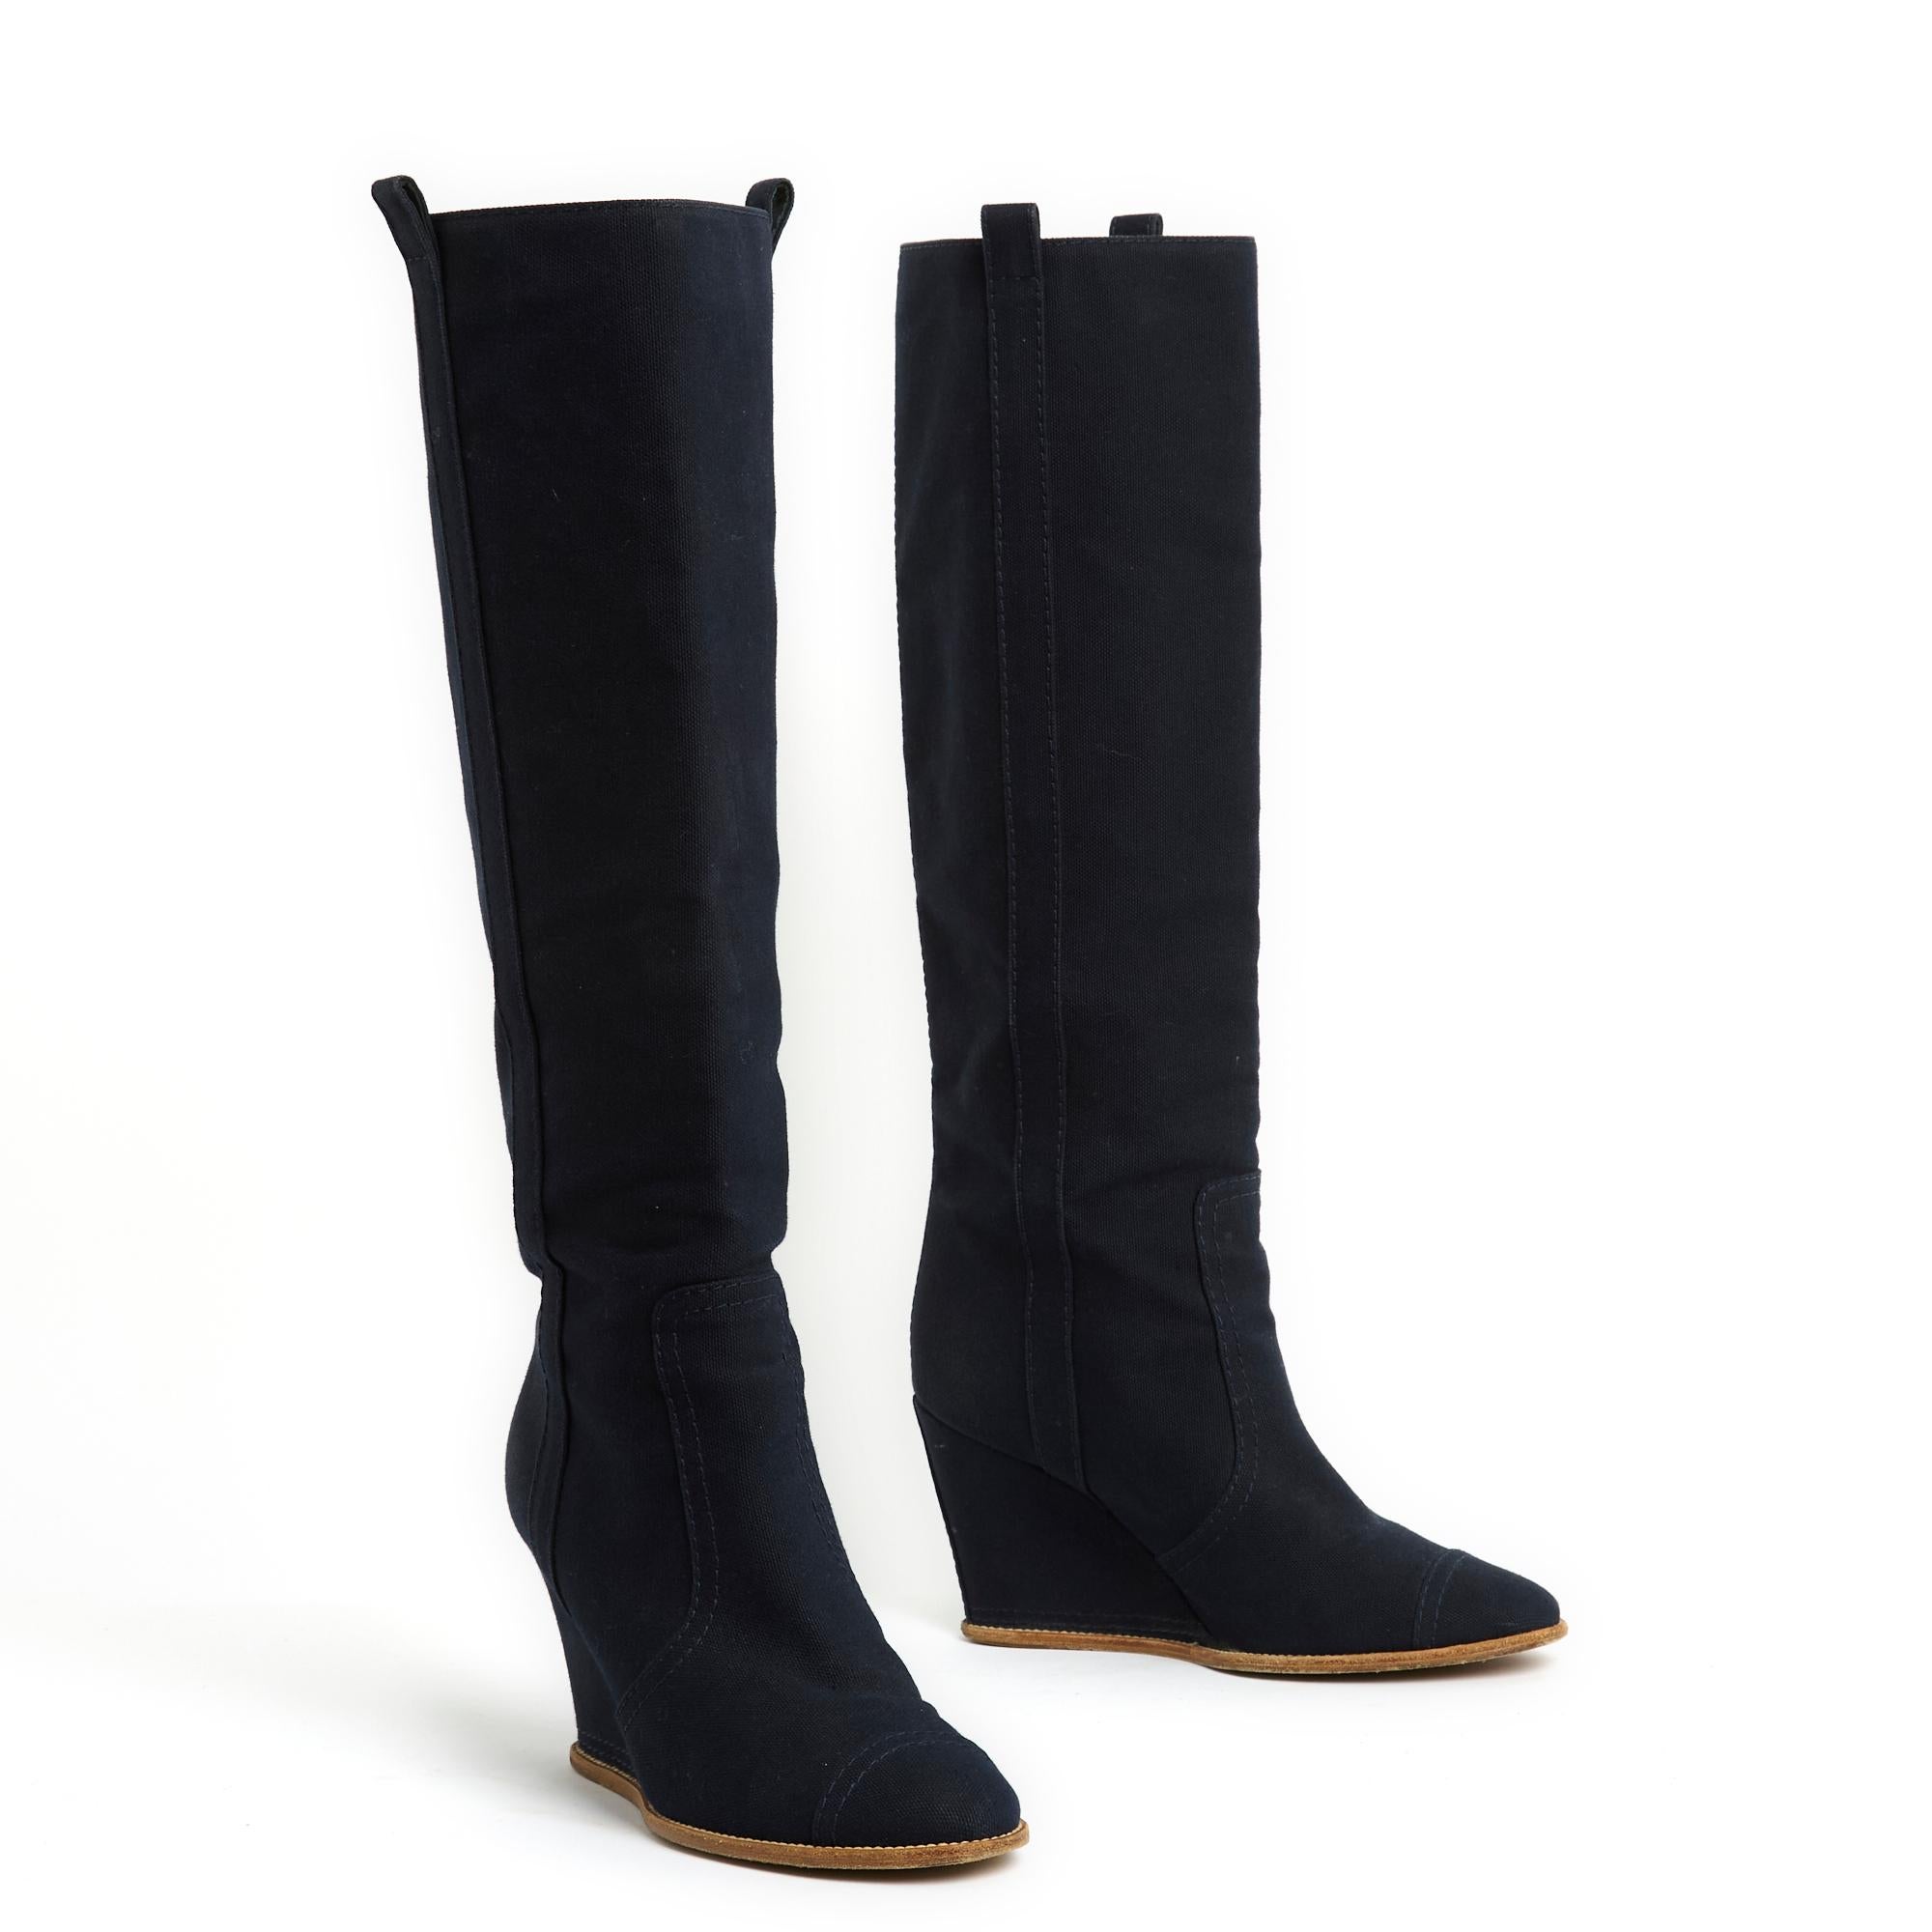 Chanel wedge heel boots in navy blue denim style canvas, straight upper, compensated heel, almond toe. Size EU39: heel 8.5 cm, insole 25 cm, height of the upper (from the heel) 40 cm, ankle circumference 31 cm, calf circumference 35 cm. The boots